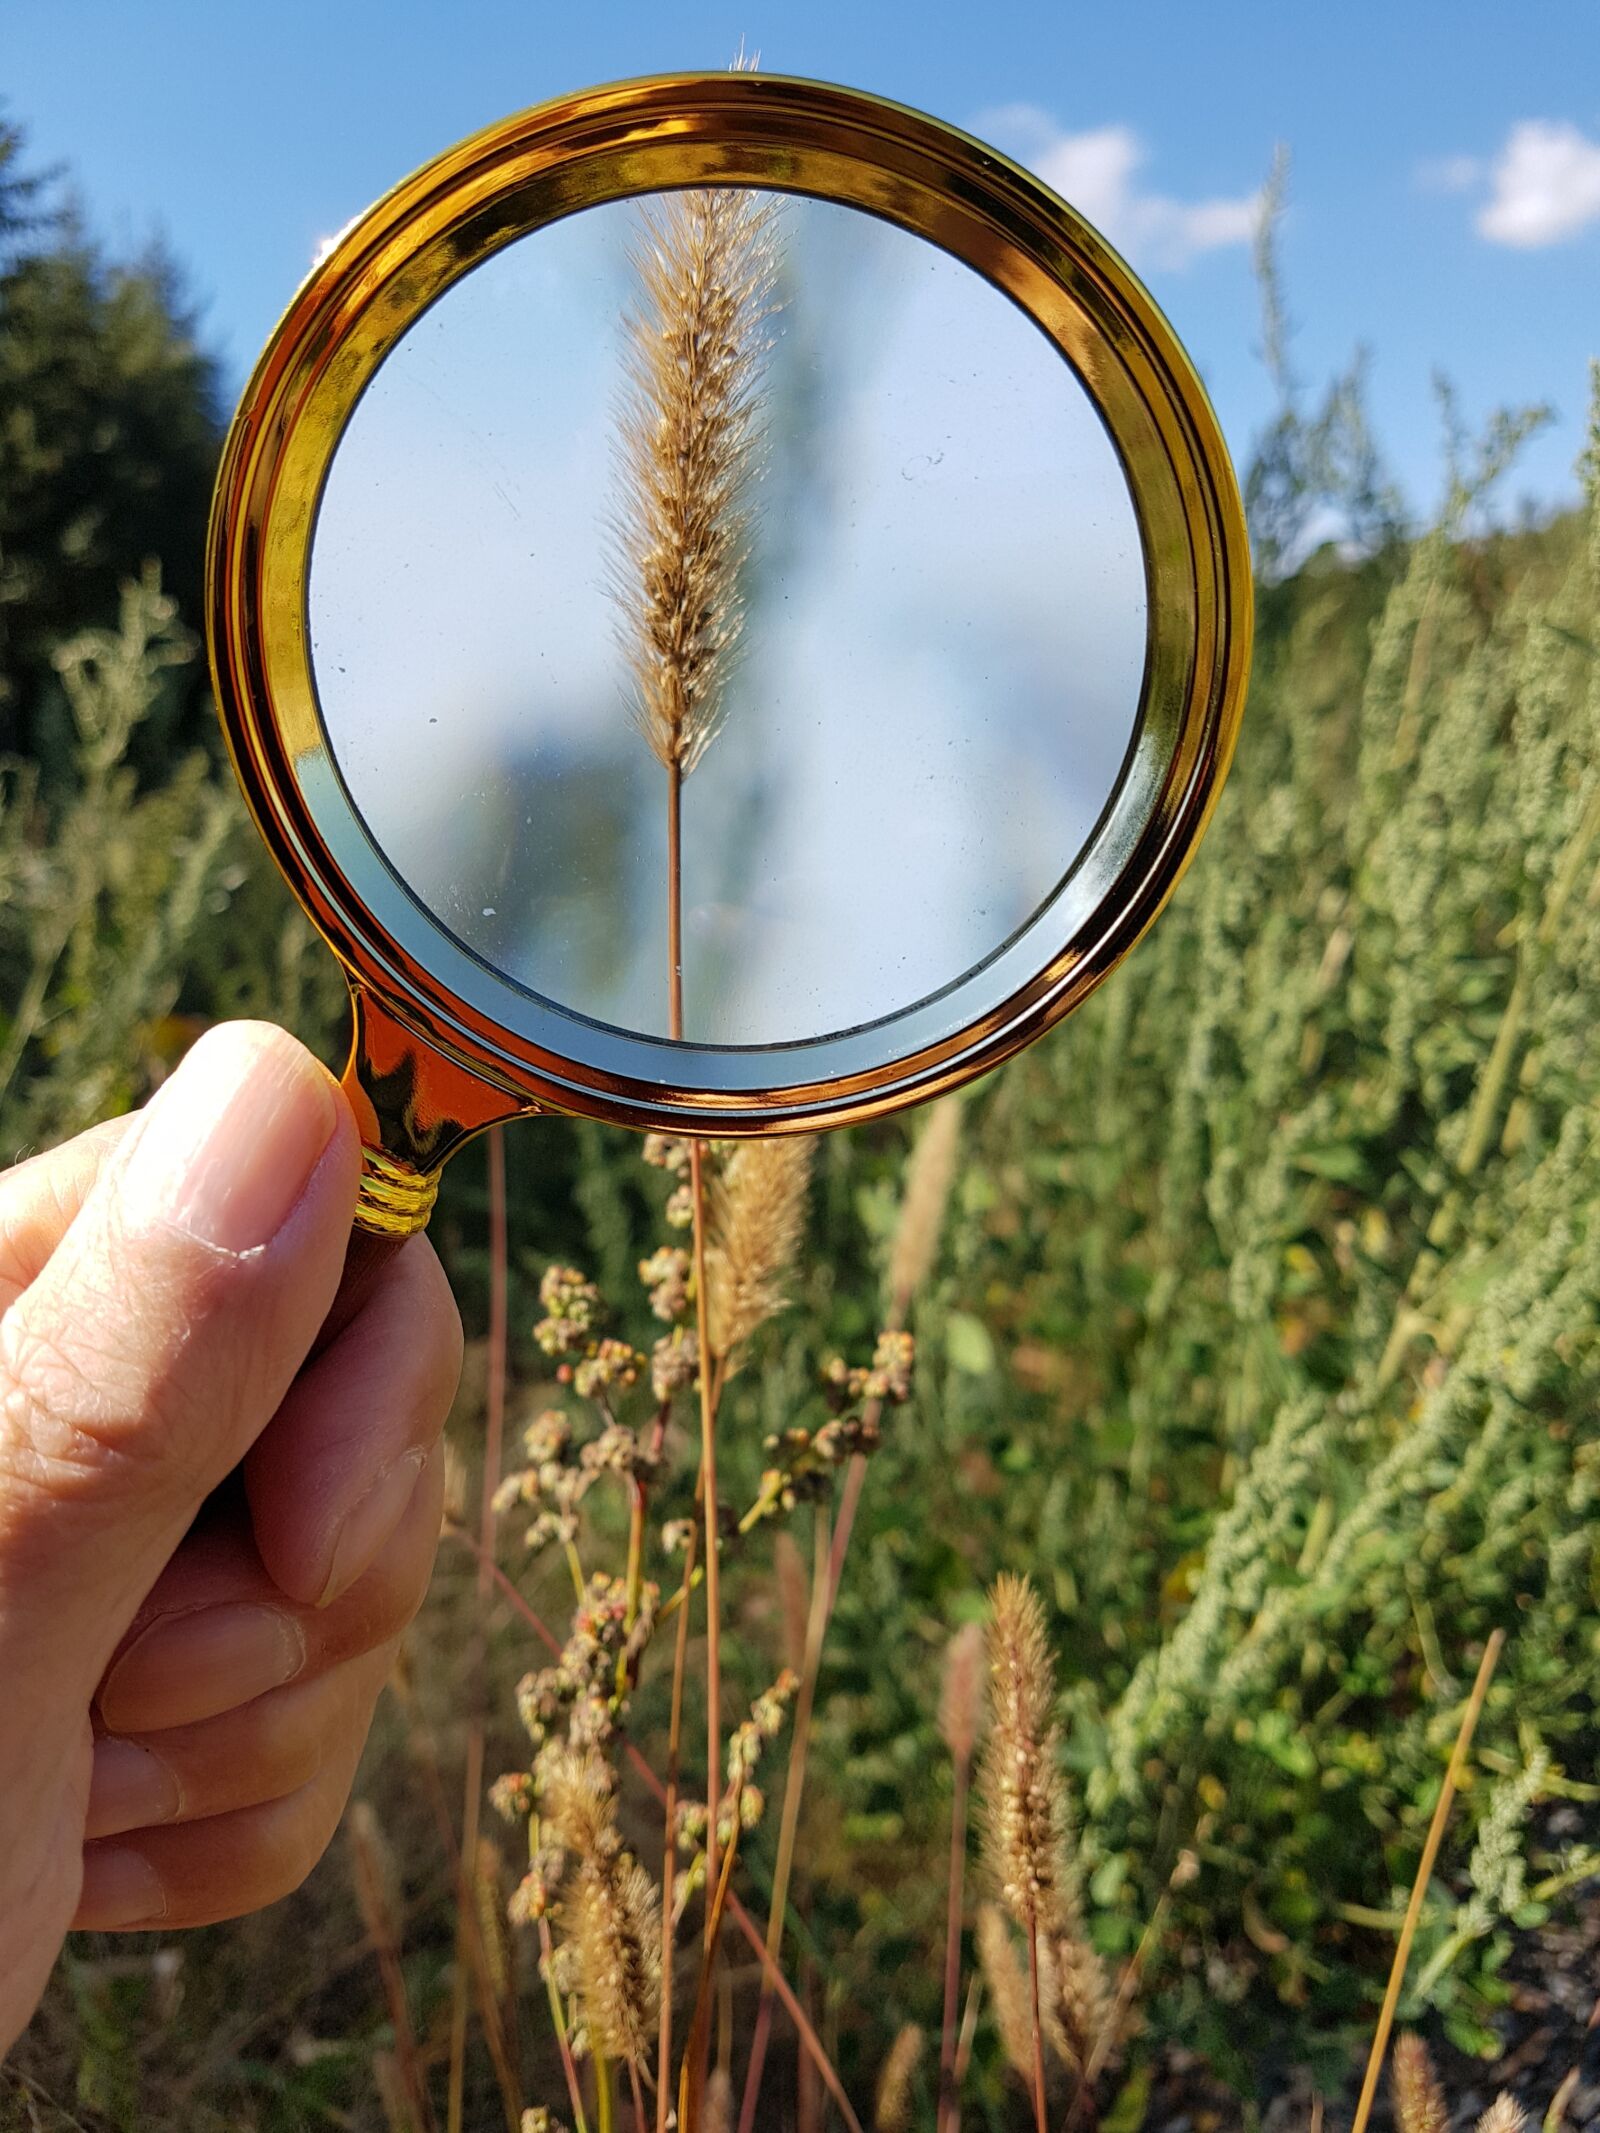 Samsung Galaxy S7 sample photo. Magnifying glass, magnification, nature photography